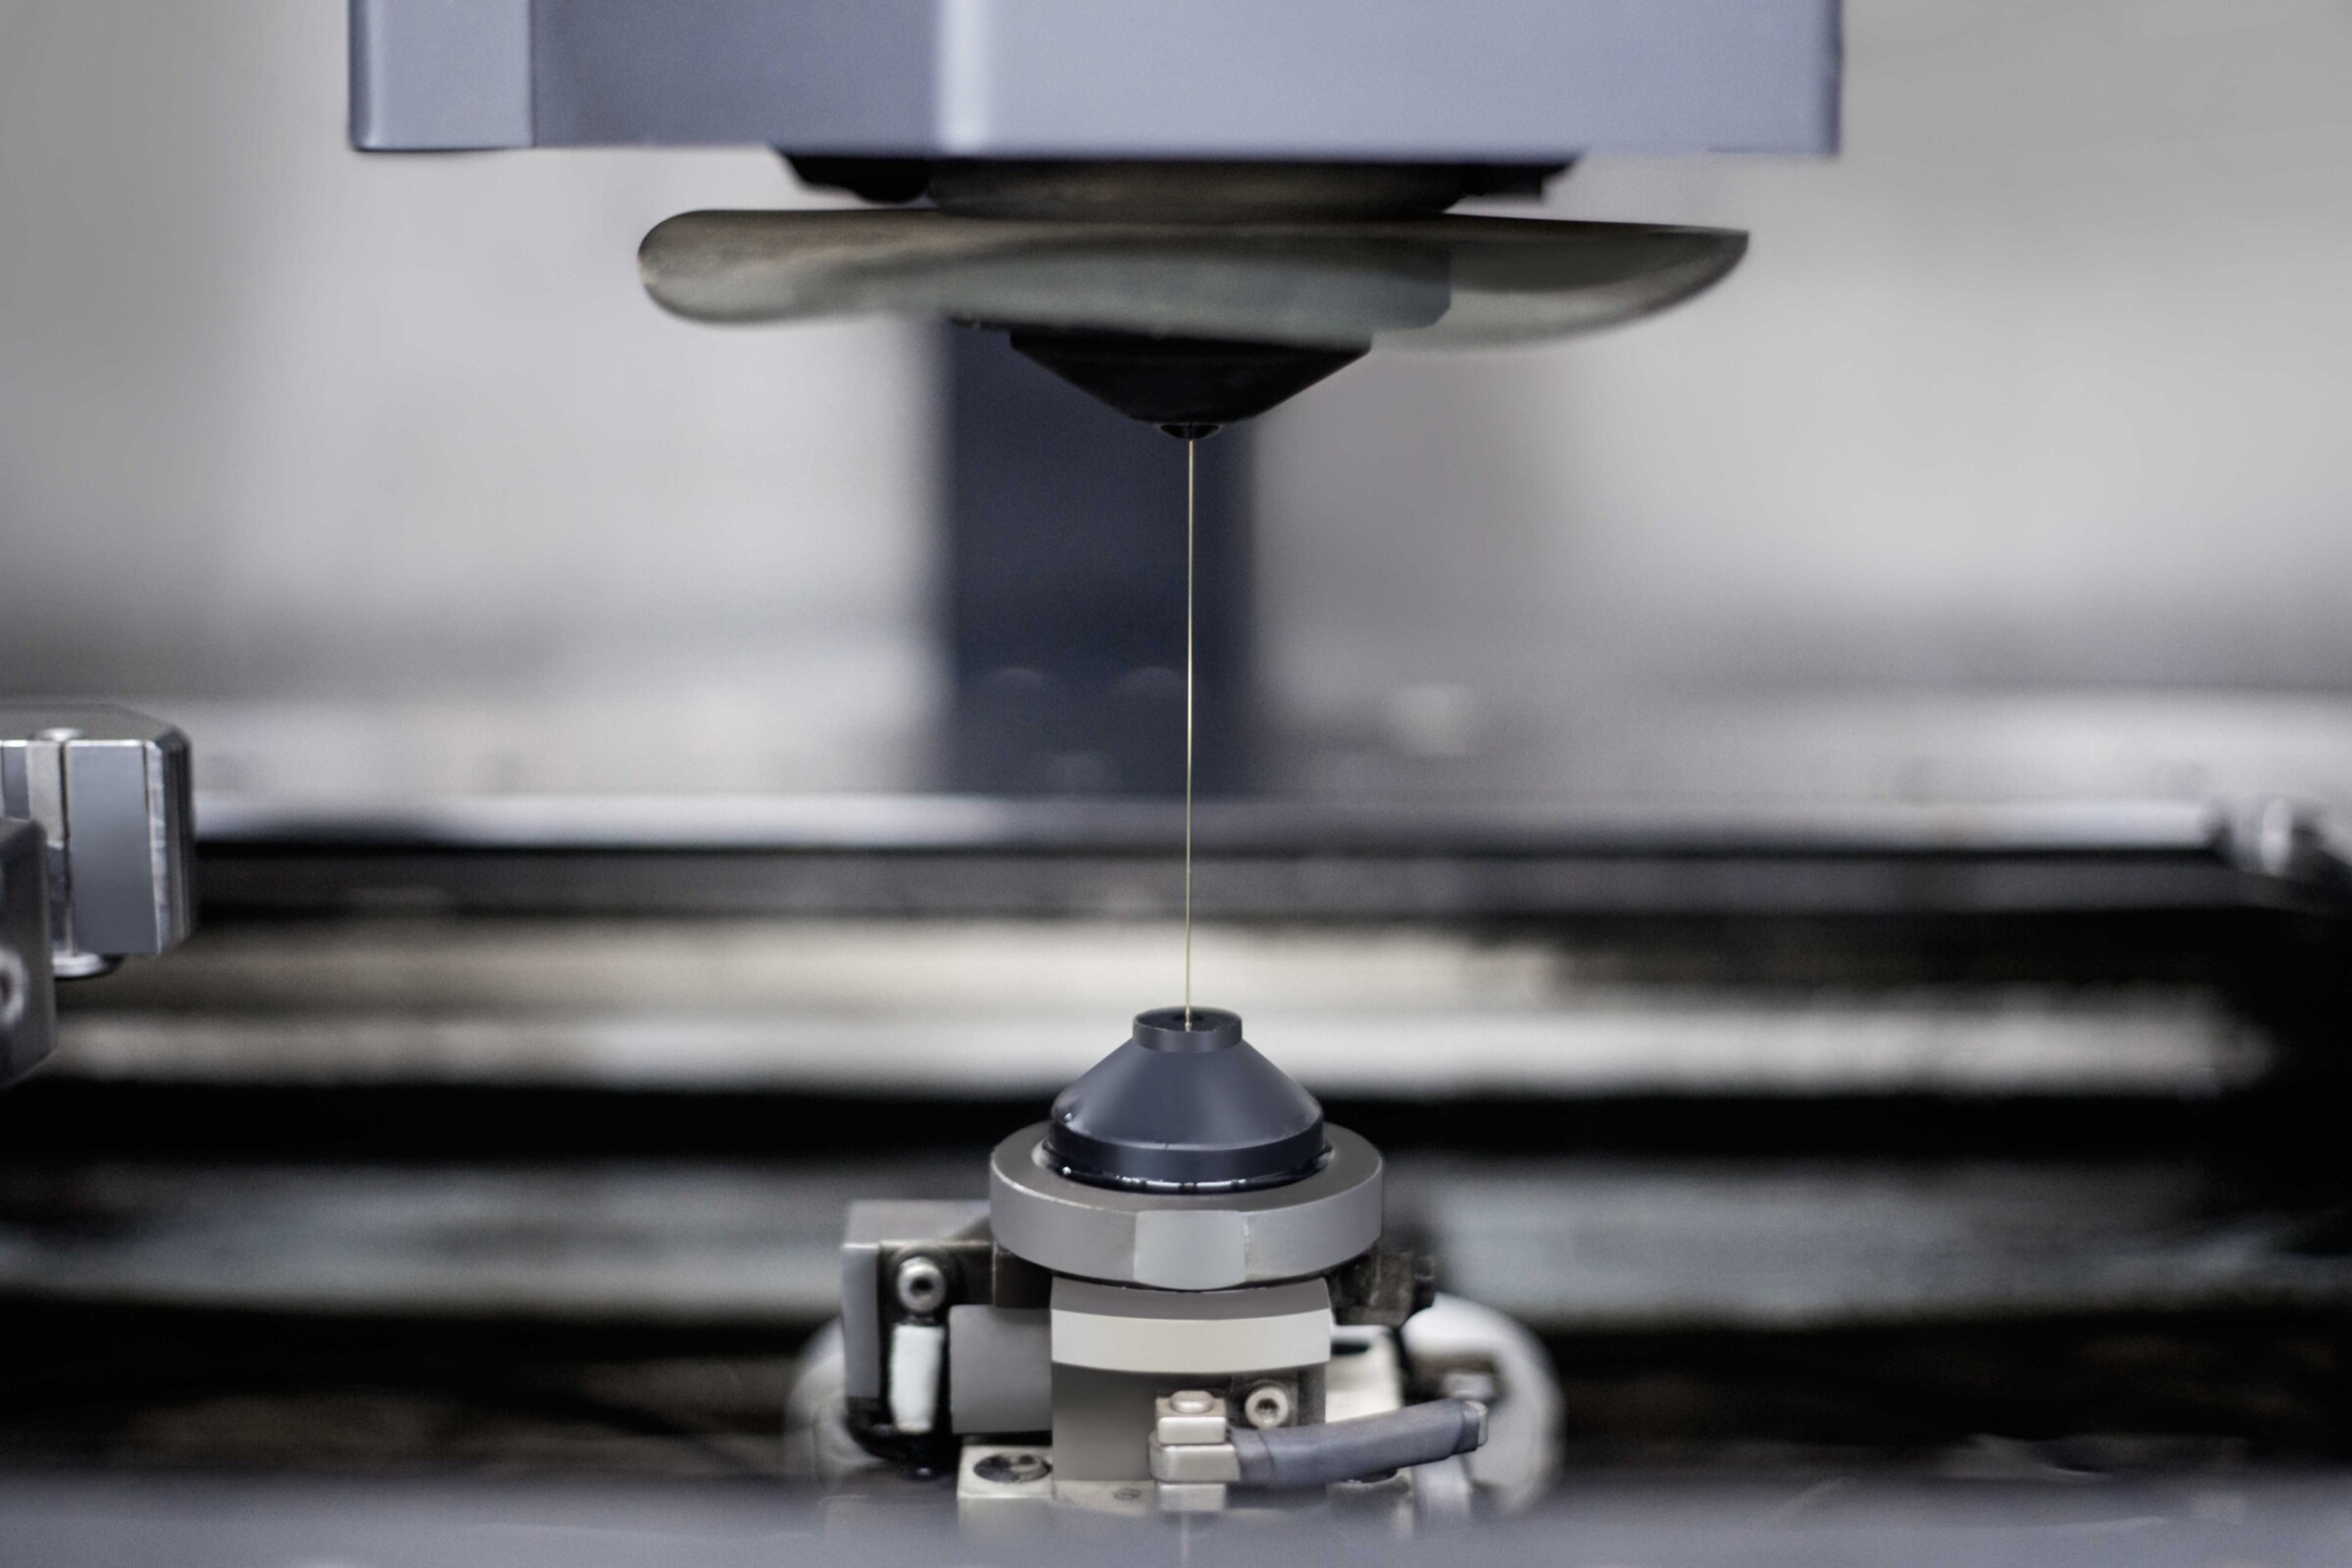 For the machining of precise geometries in hard materials, there’s no alternative at Schäfer Feinmechanik in Oberndorf an der Salzach to wire EDM as a ­cost-effective and high-accuracy production method.